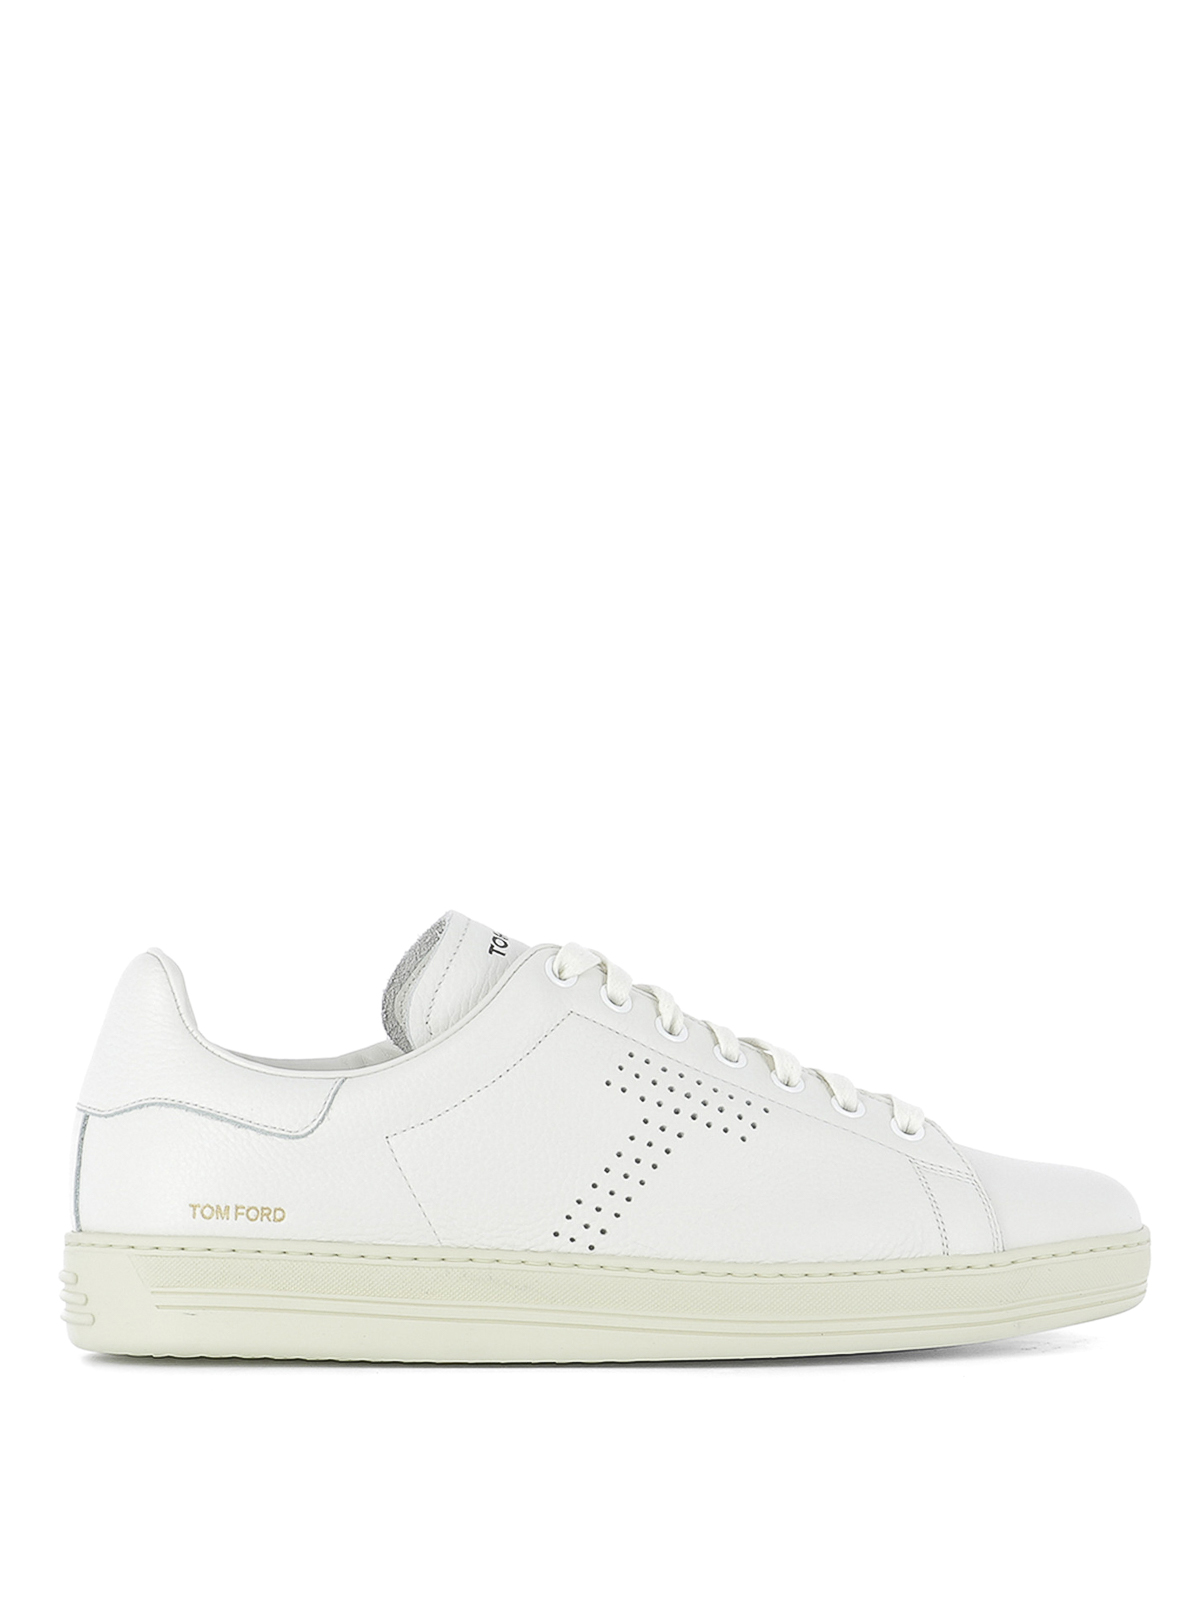 Tom Ford - Perforated logo leather 